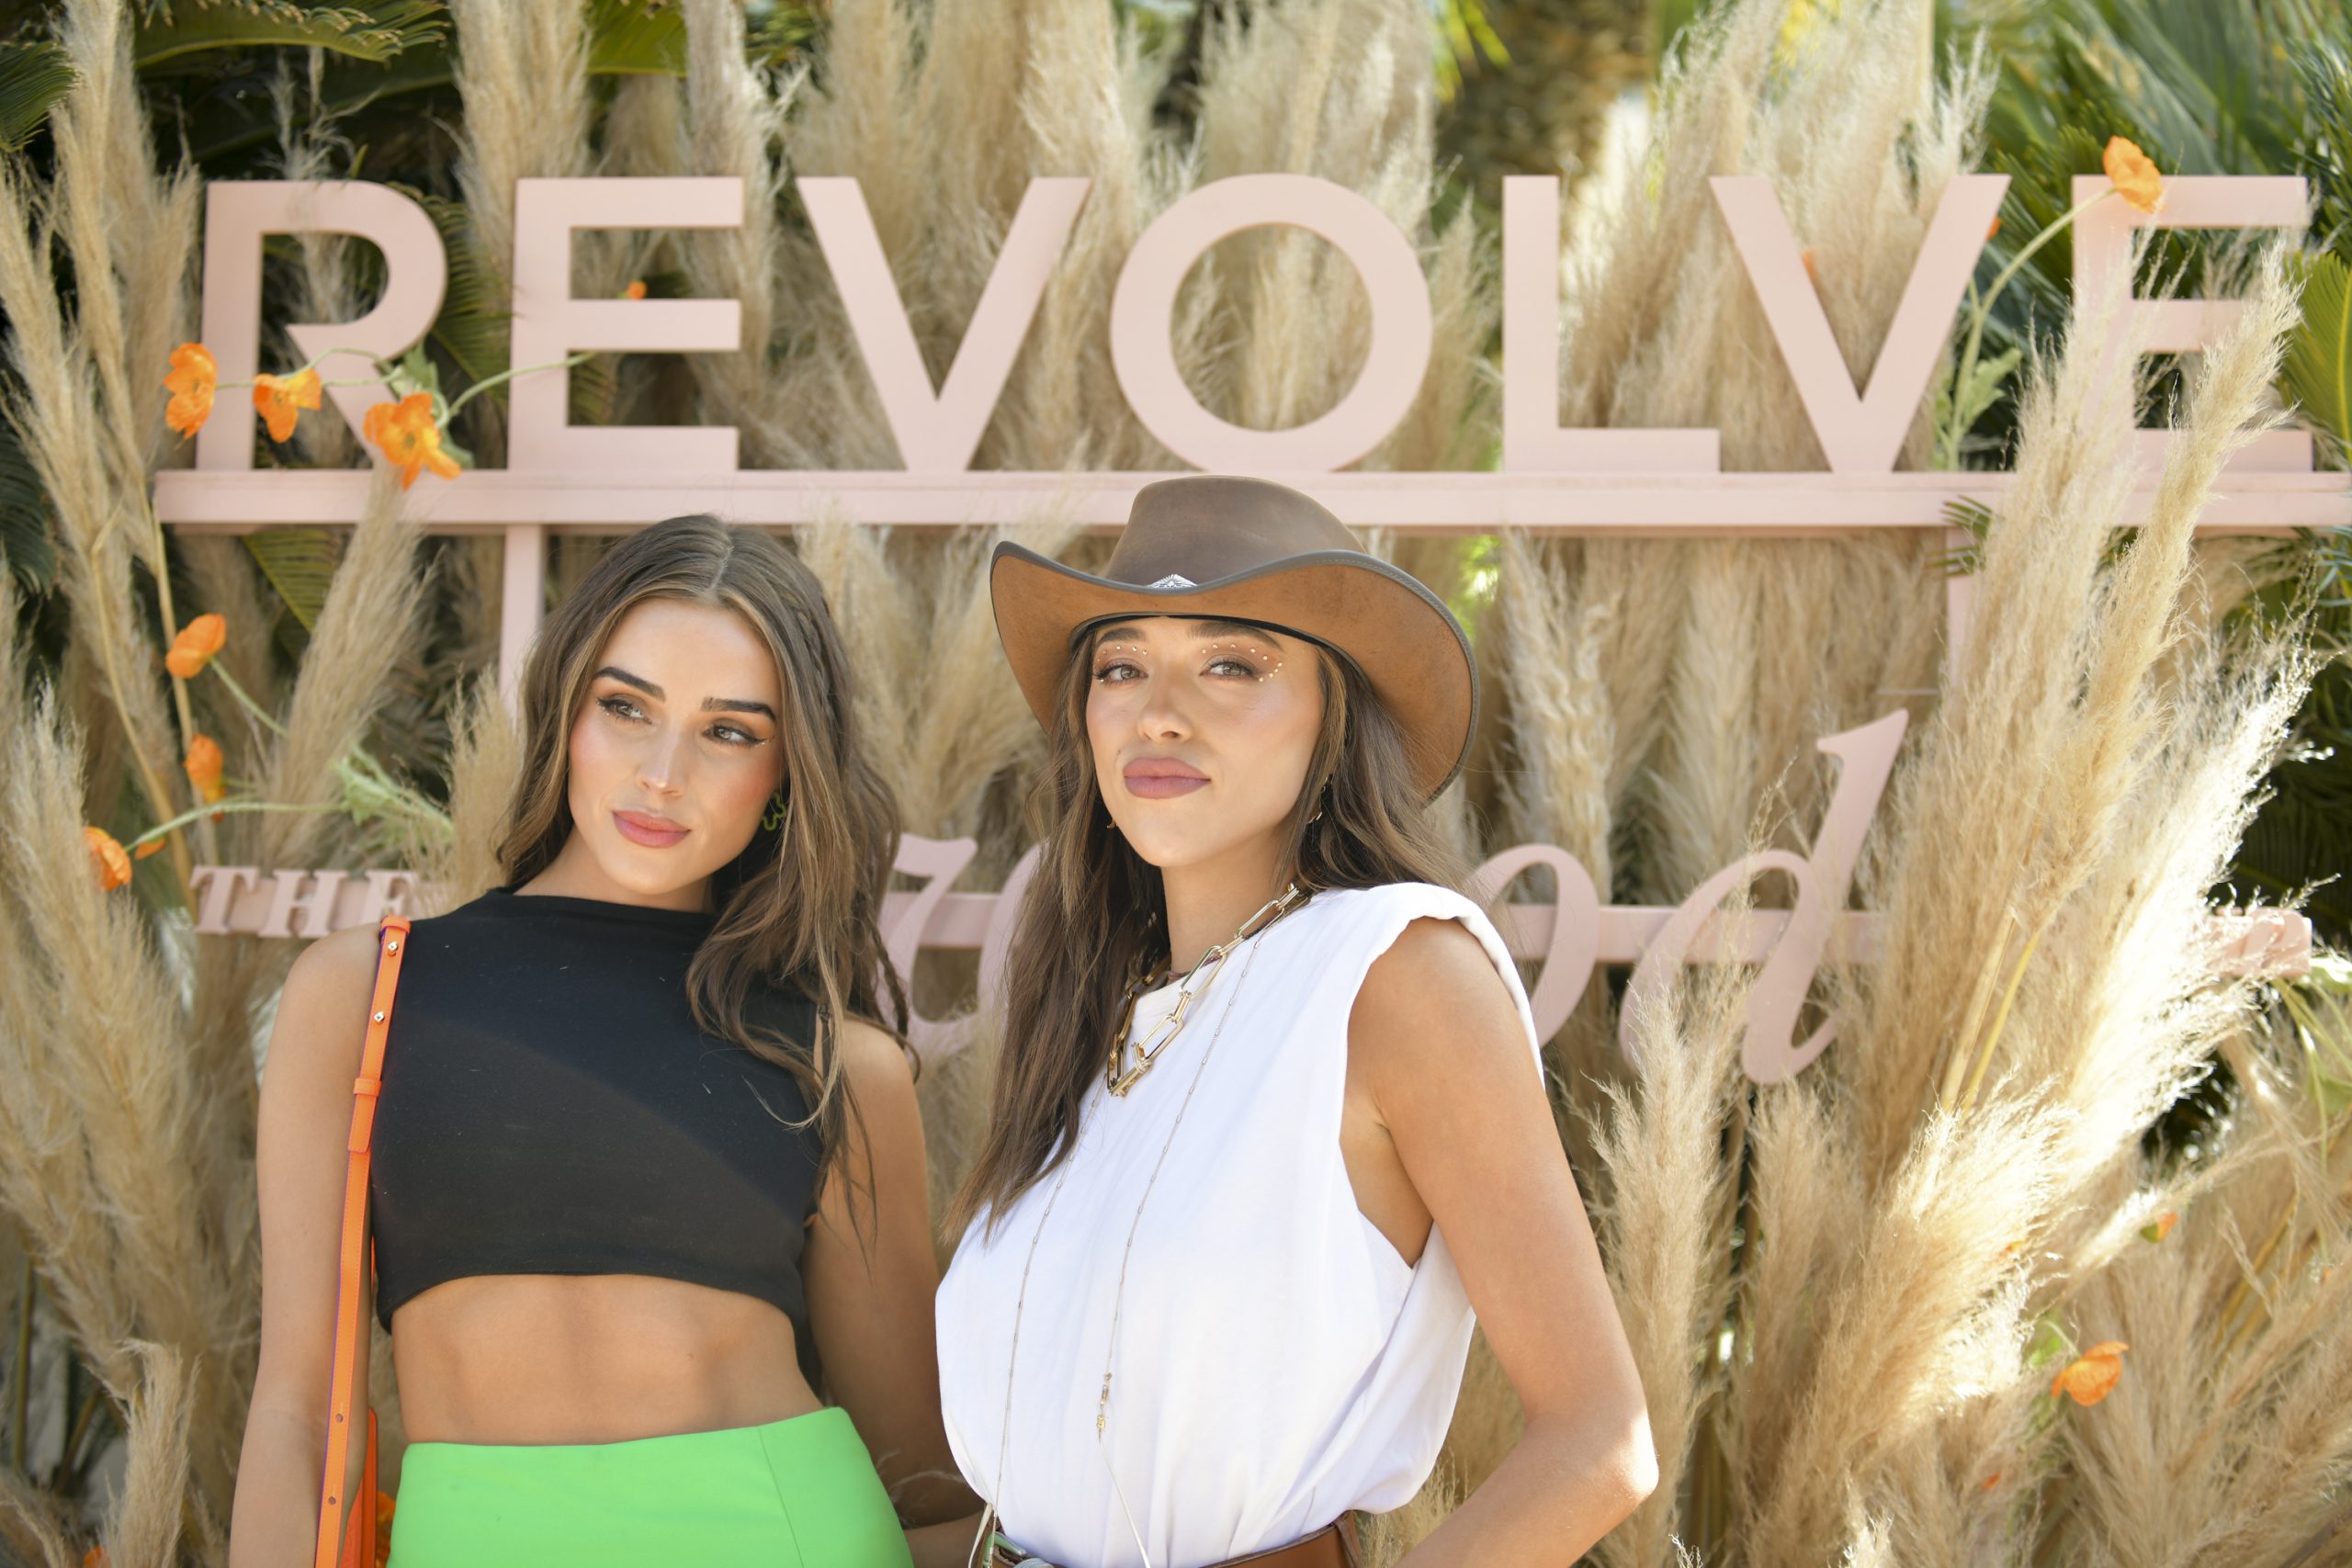 Revolve's Coachella event is compared to Fyre Festival as influencers say they were stranded in the hot desert